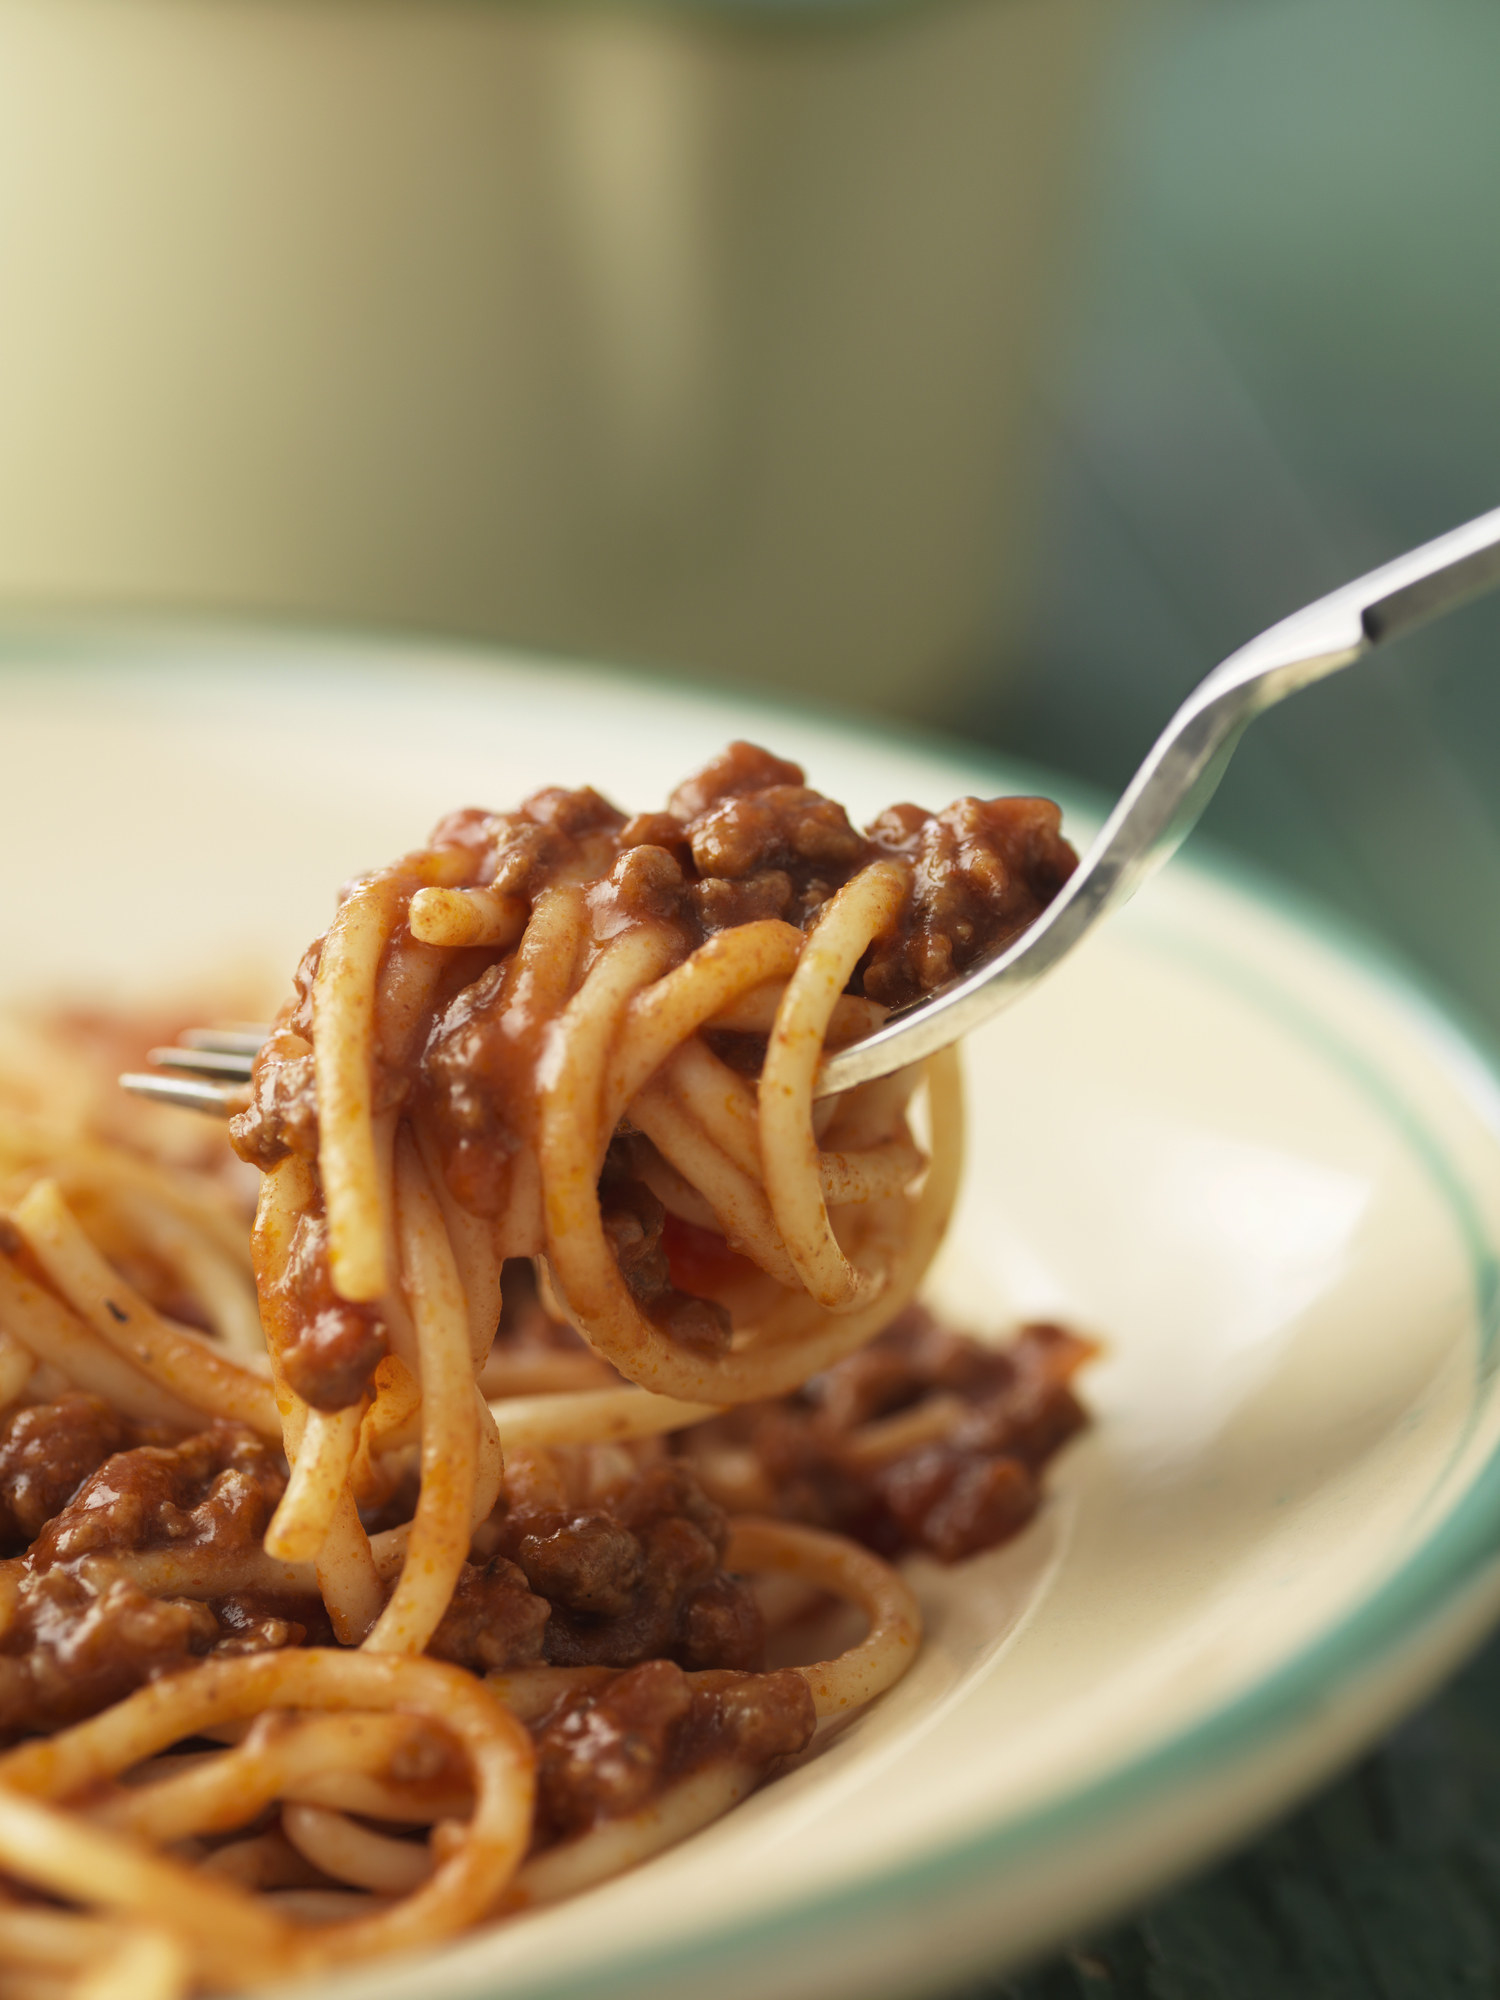 Spaghetti and meat sauce on a fork over a plate